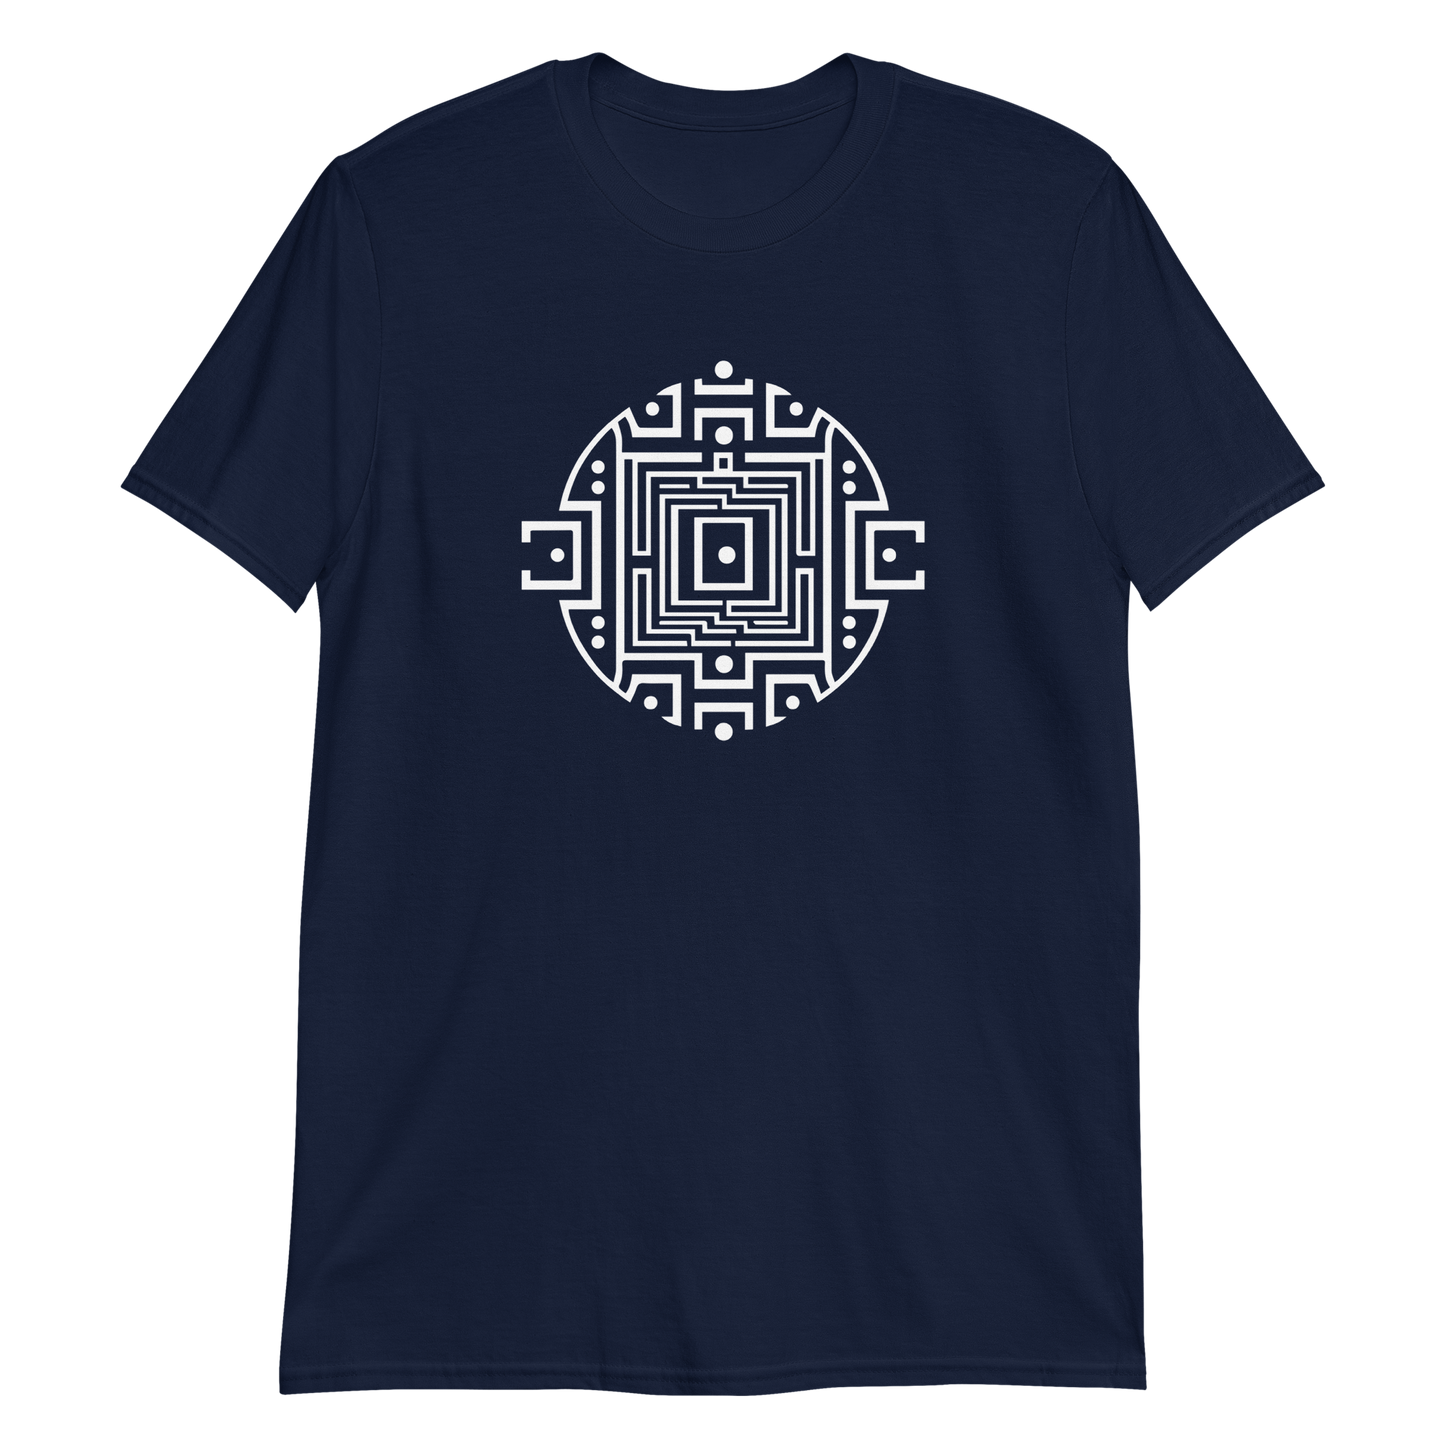 Abstract Maze Architecture T-Shirt (free shipping)